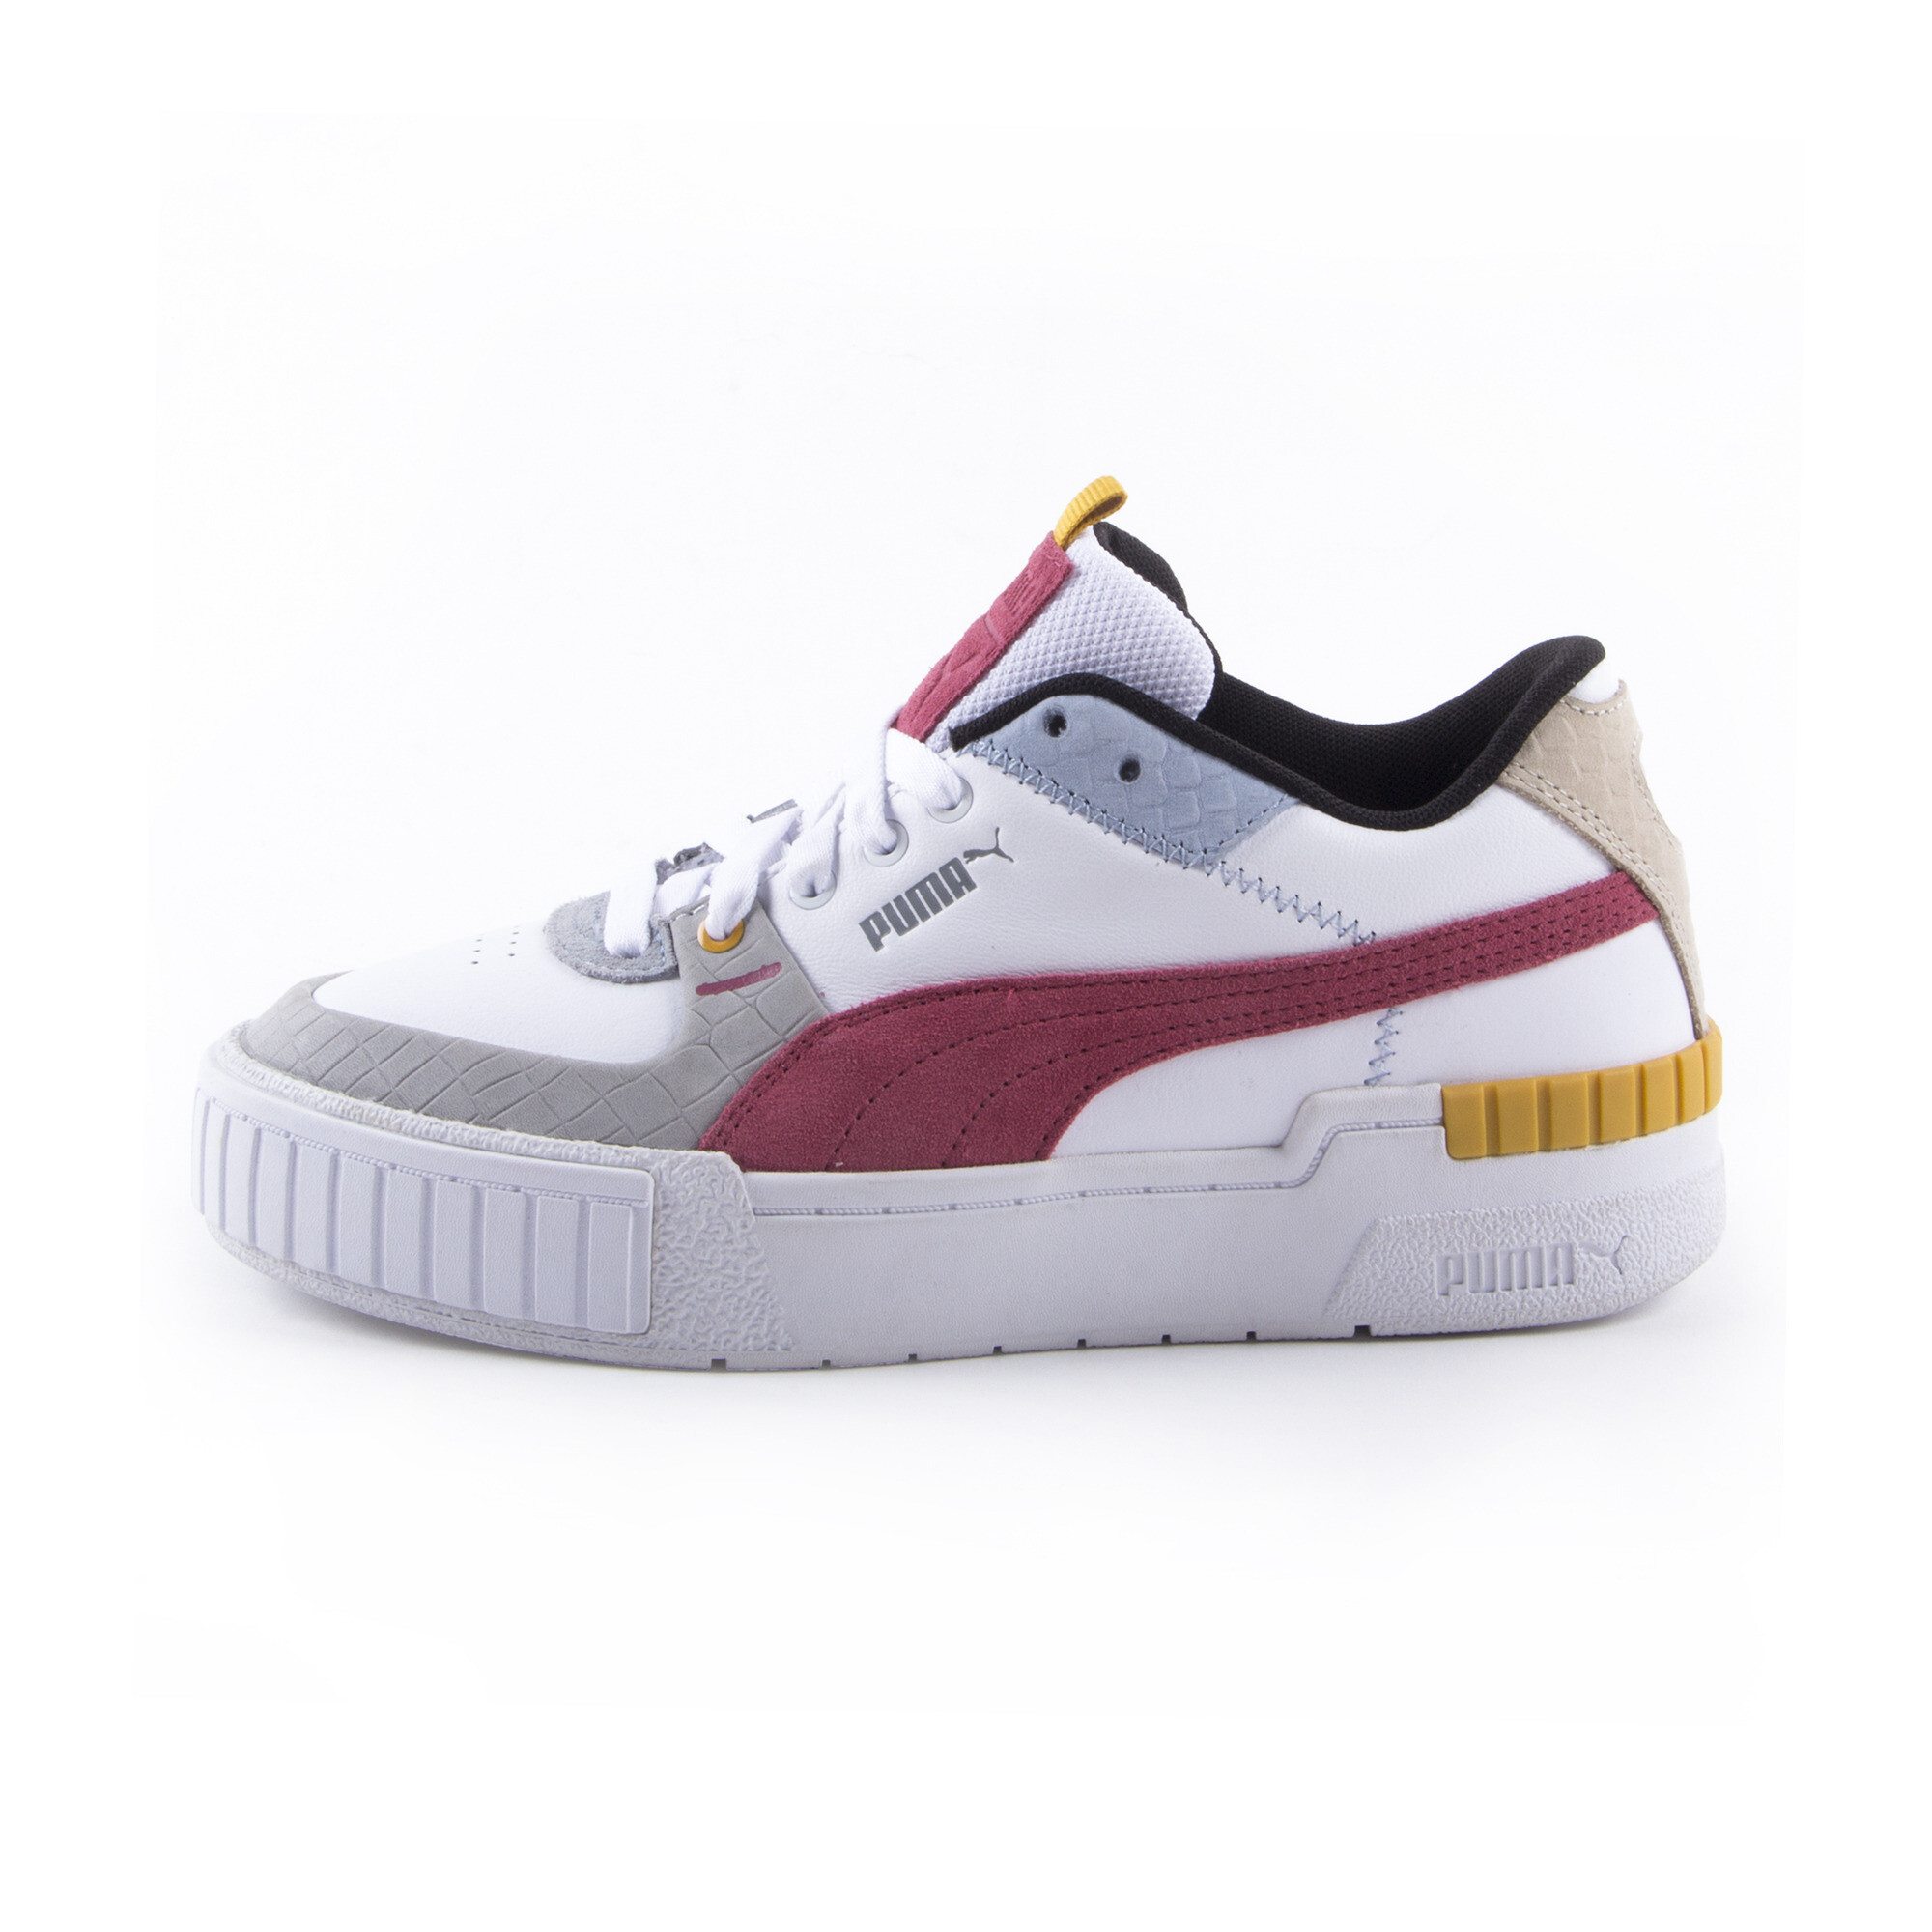 Cali Sport Bright Heights Women's Trainers | Lifestyle | PUMA